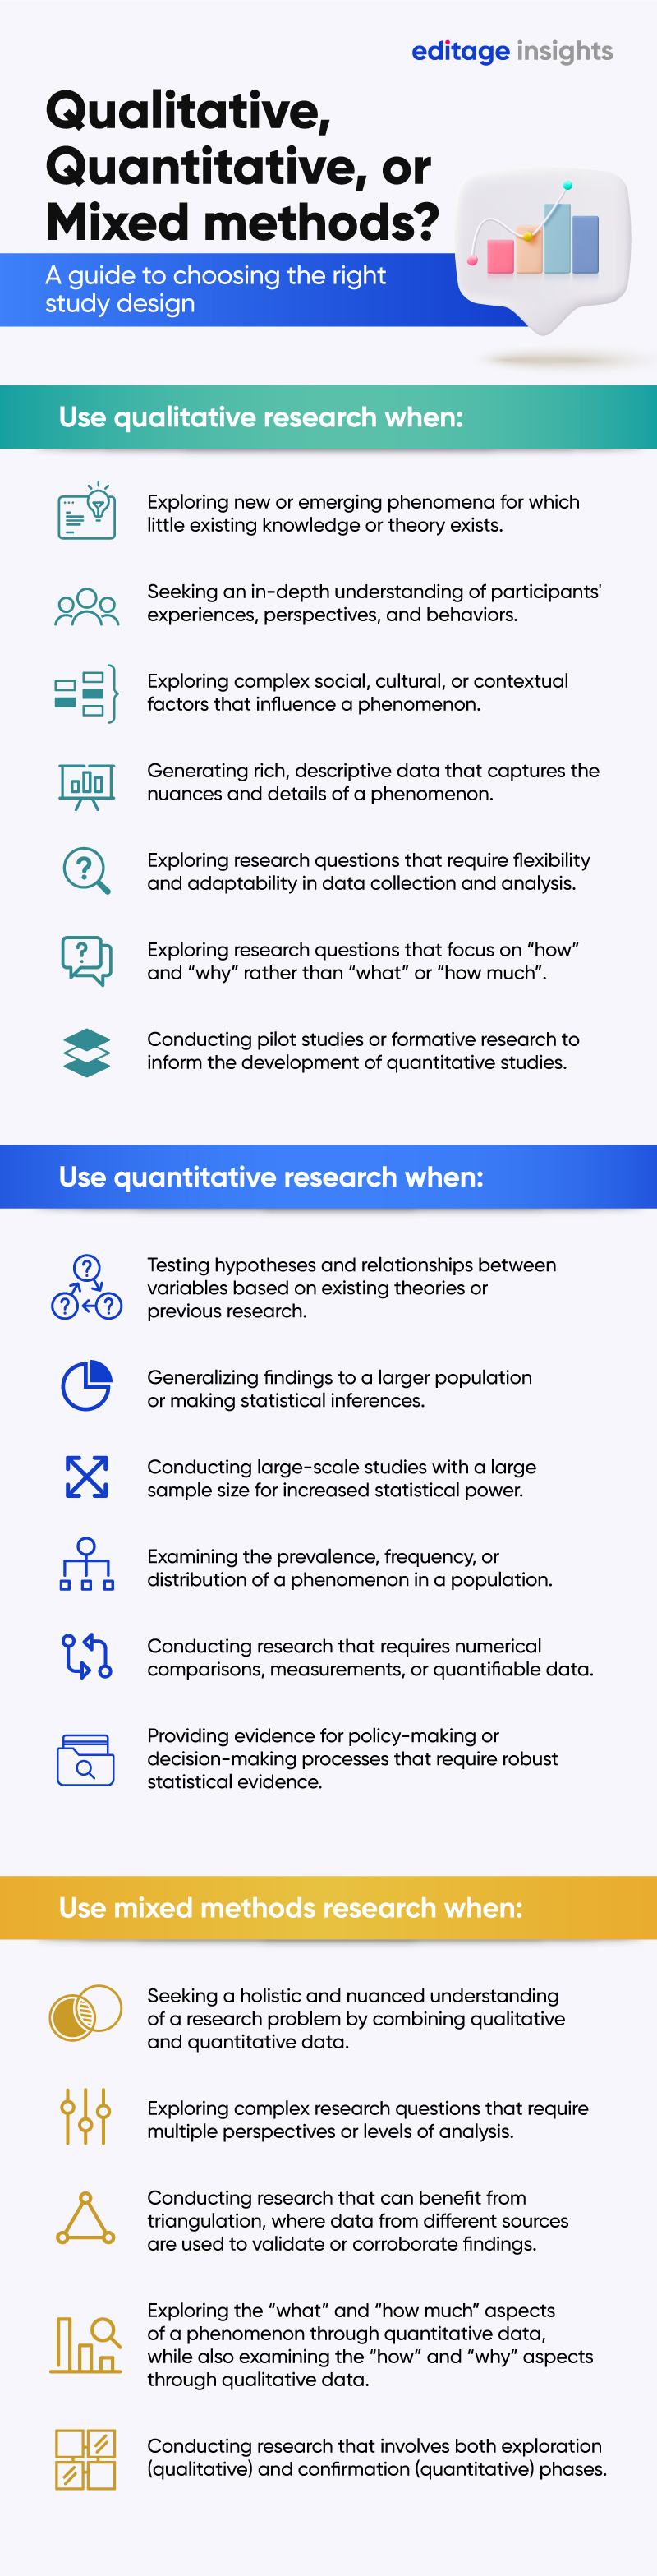 Selecting the Right Analyses for Your Data: Quantitative, Qualitative, and  Mixed Methods